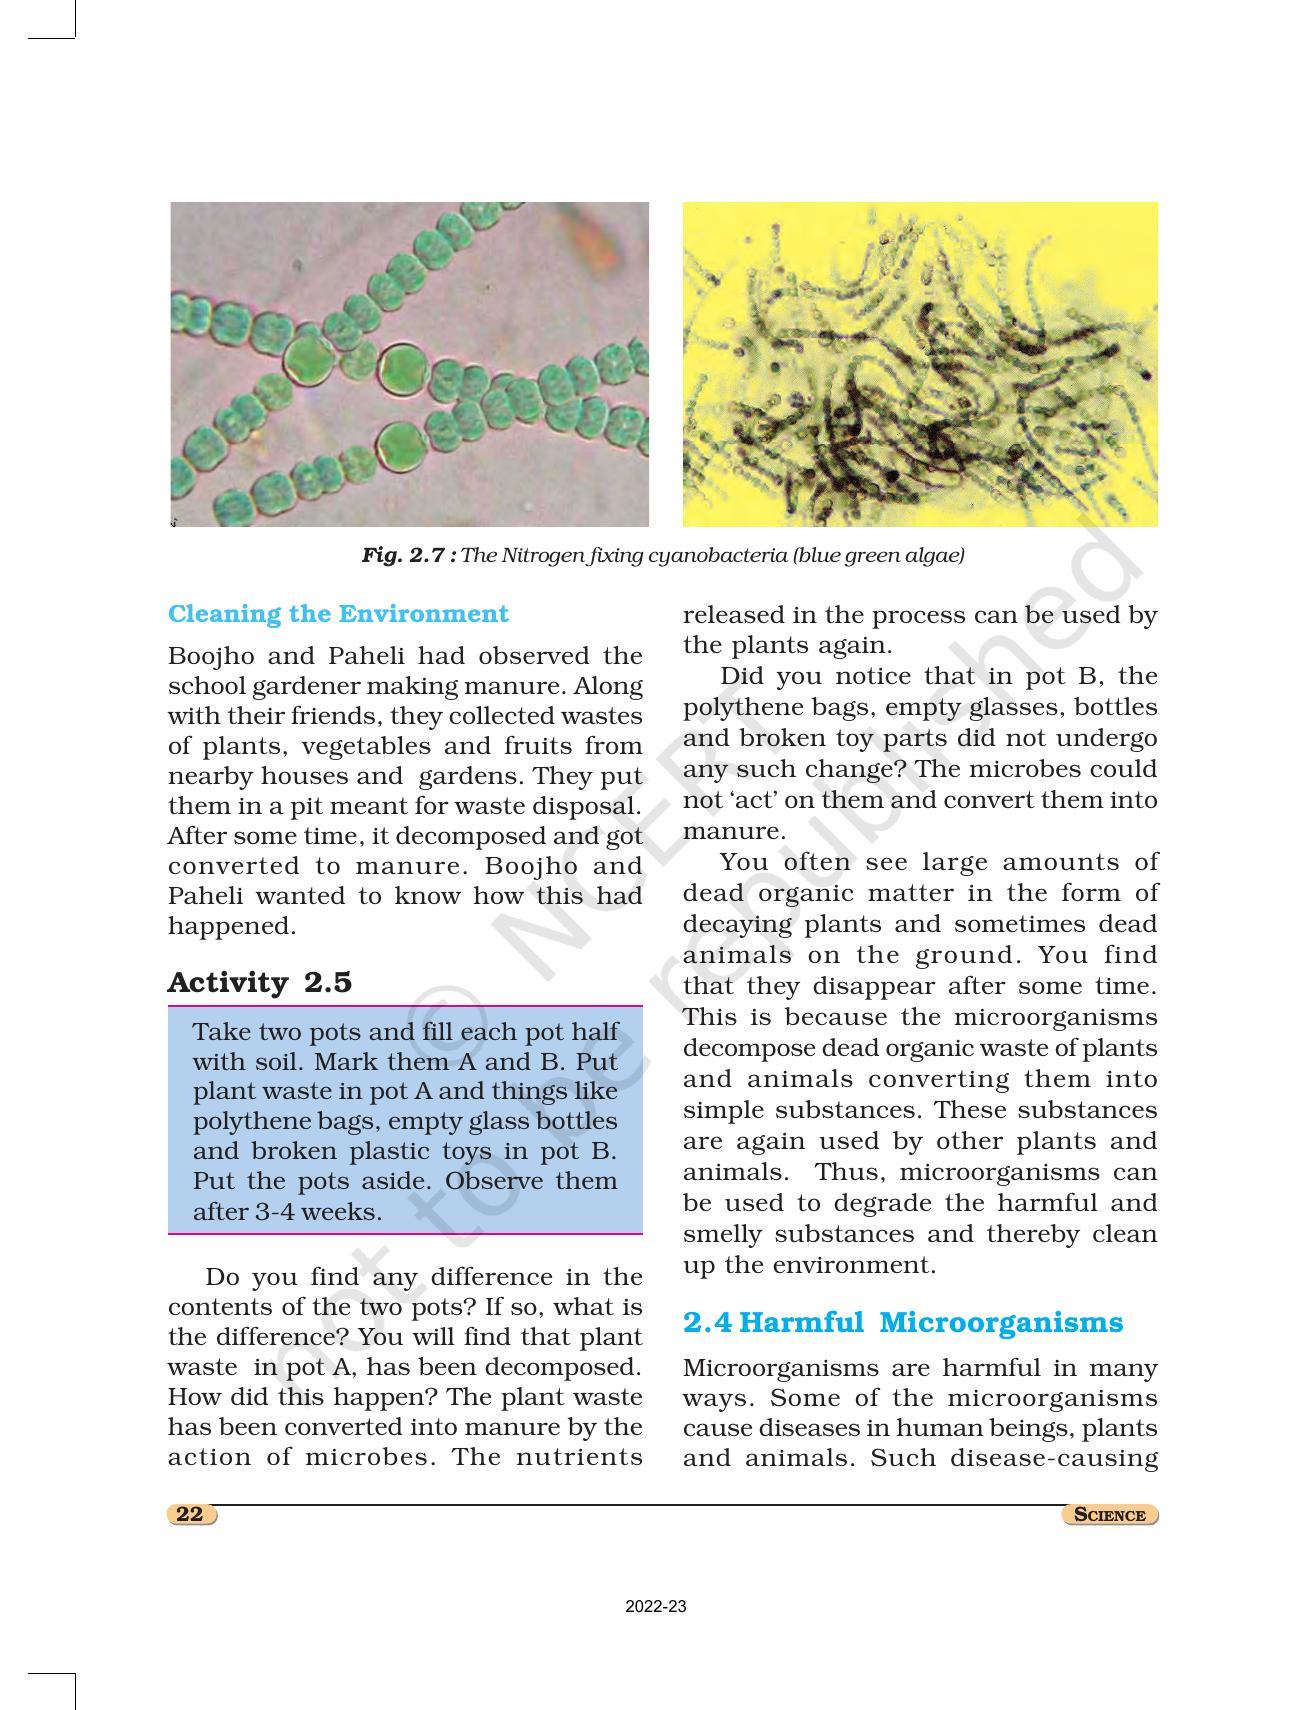 NCERT Book for Class 8 Science Chapter 2 Microorganisms: Friend and Foe - Page 6